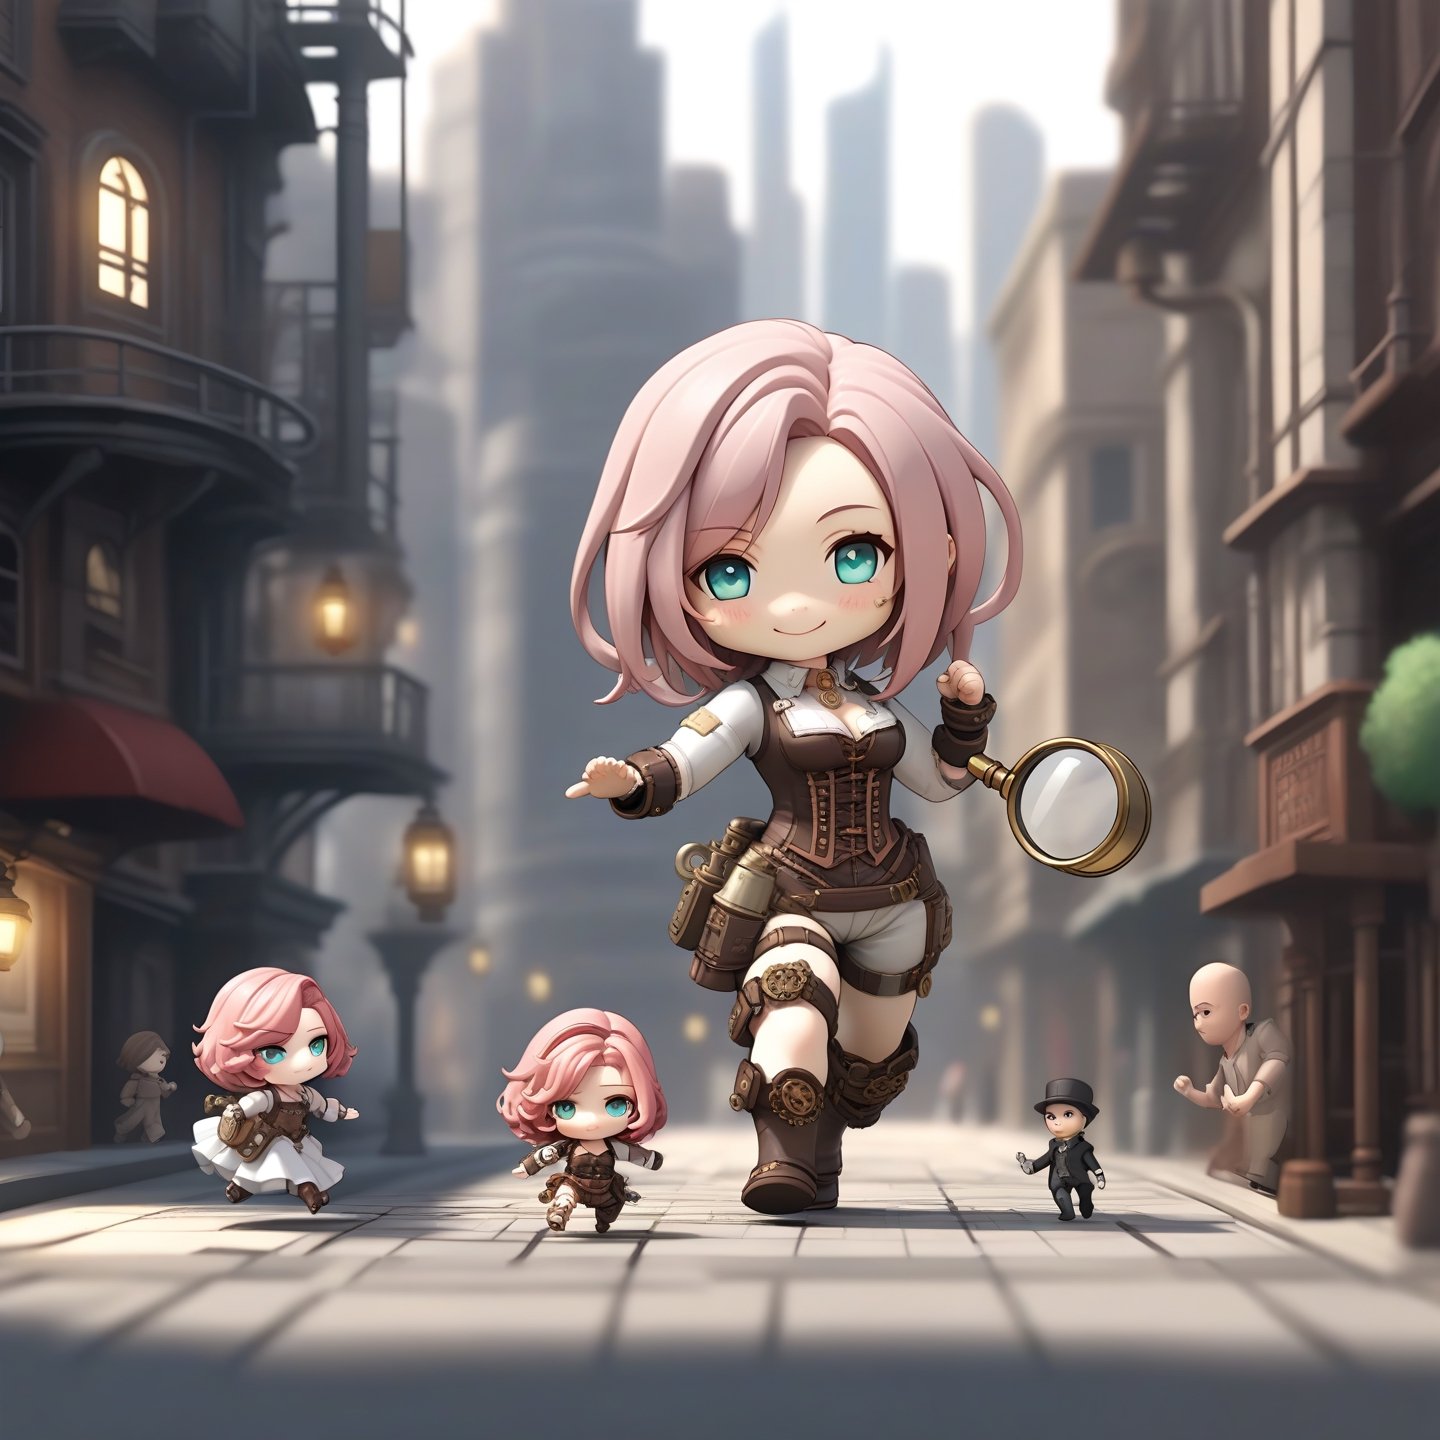 Masterpiece, Best Quality, High Resolution, PVC, Rendering, Chibi, High Resolution, Single Girl, Anya, Anya Forger, Steampunk Costume, Pink Hair, Bob Hair, Smile, Selfish, Chibi, Being Chased Around the City, One Hand Magnifying Glass , Smile, Smile, Self-Justice, Full Body, Chibi, 3D Figure, Toy, Doll, Character Print, Front View, Natural Light, ((Real)) Quality: 1.2)), Dynamic Pose, Cinematic Lighting